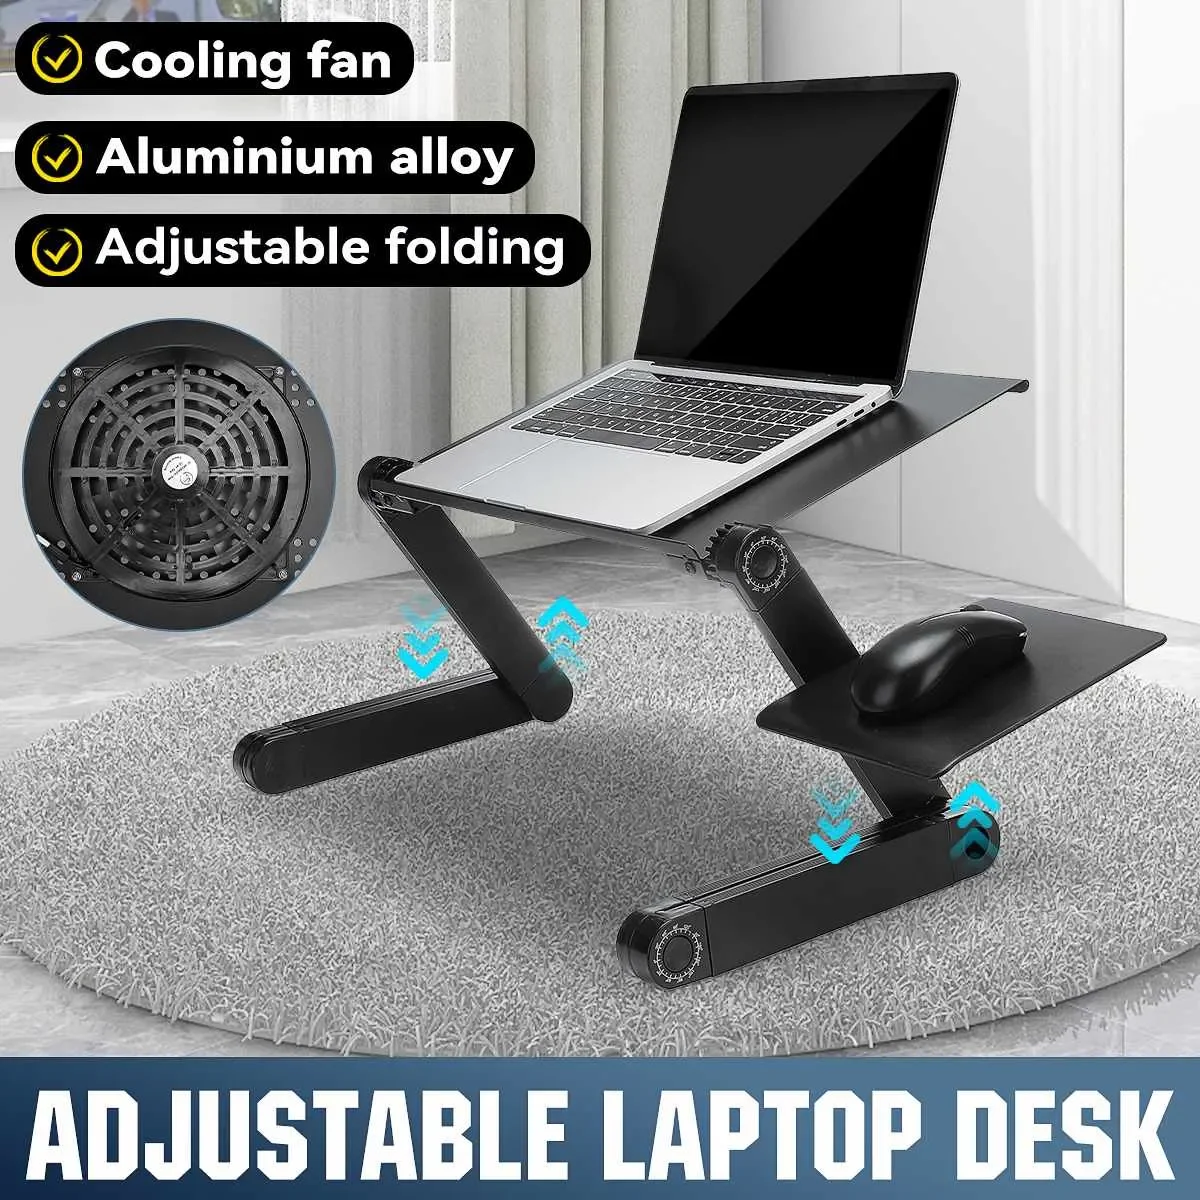 

Table Stand With Adjustable Folding Ergonomic Design Stand Notebook Desk For Ultrabook, Netbook Or Tablet With Mouse Pad